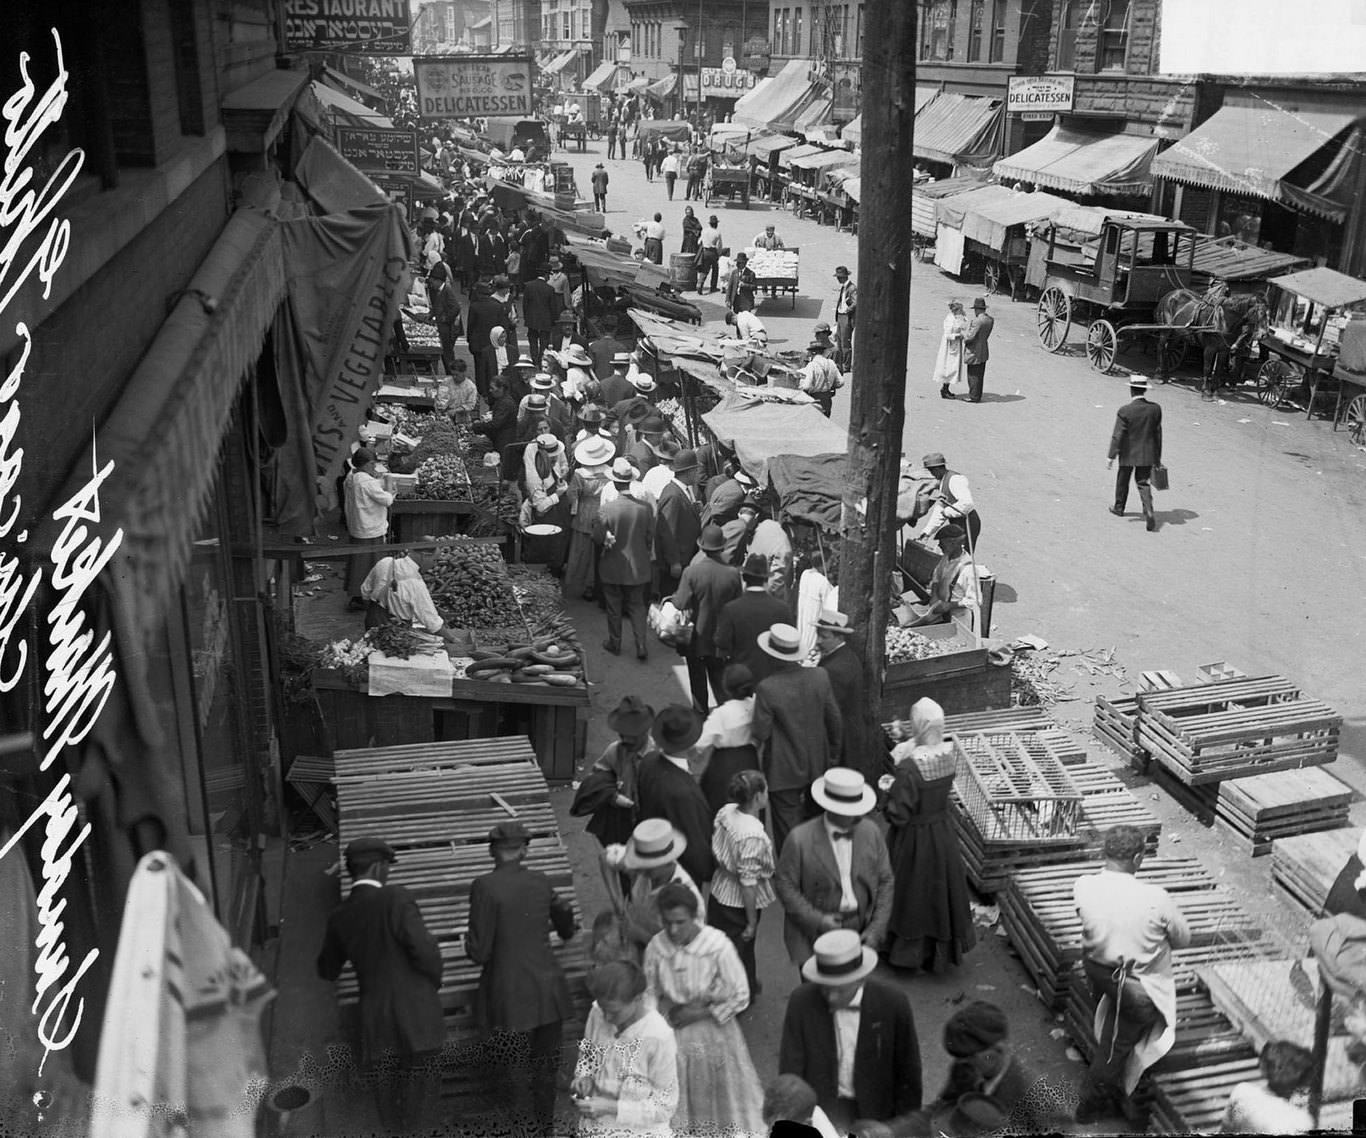 Merchants and shoppers gathering along Maxwell Street, Chicago, Illinois, 1917.